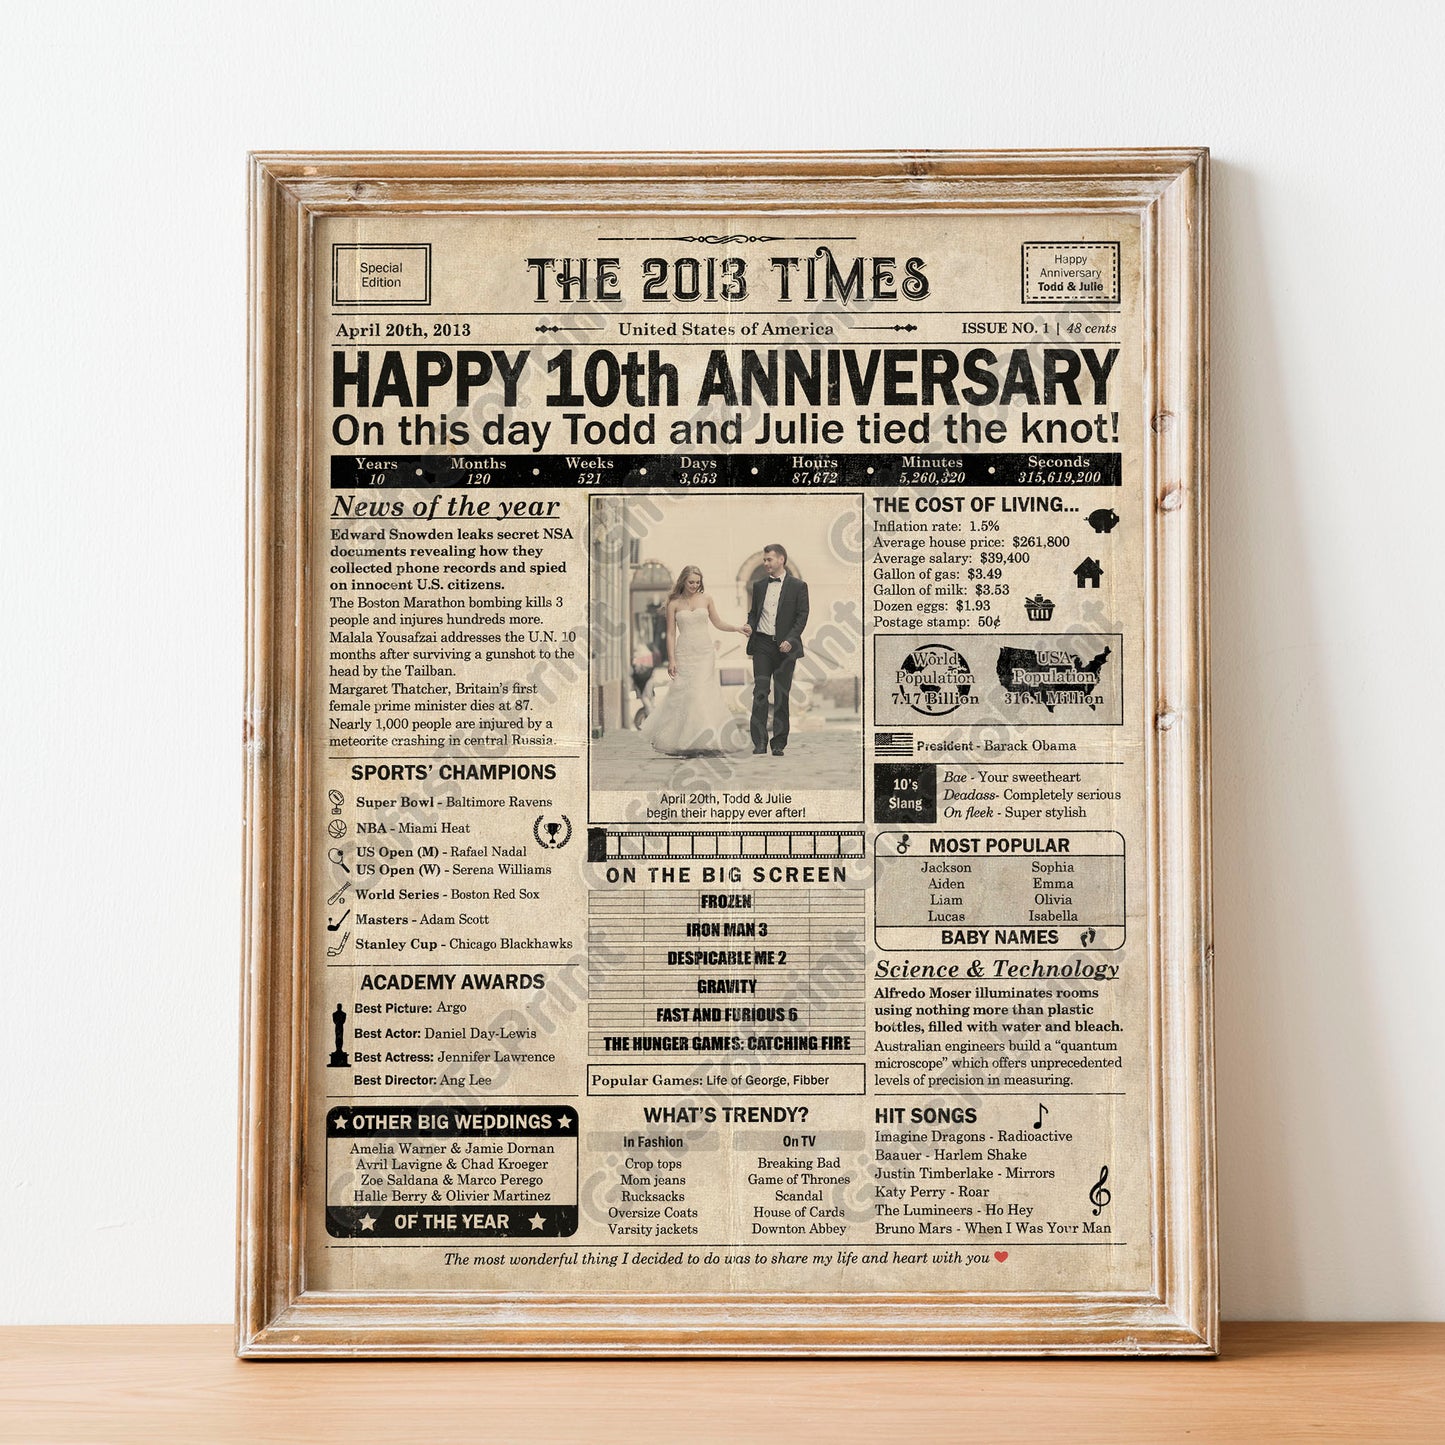 Personalized 10th Anniversary Gift: A Printable US Newspaper Poster of 2013